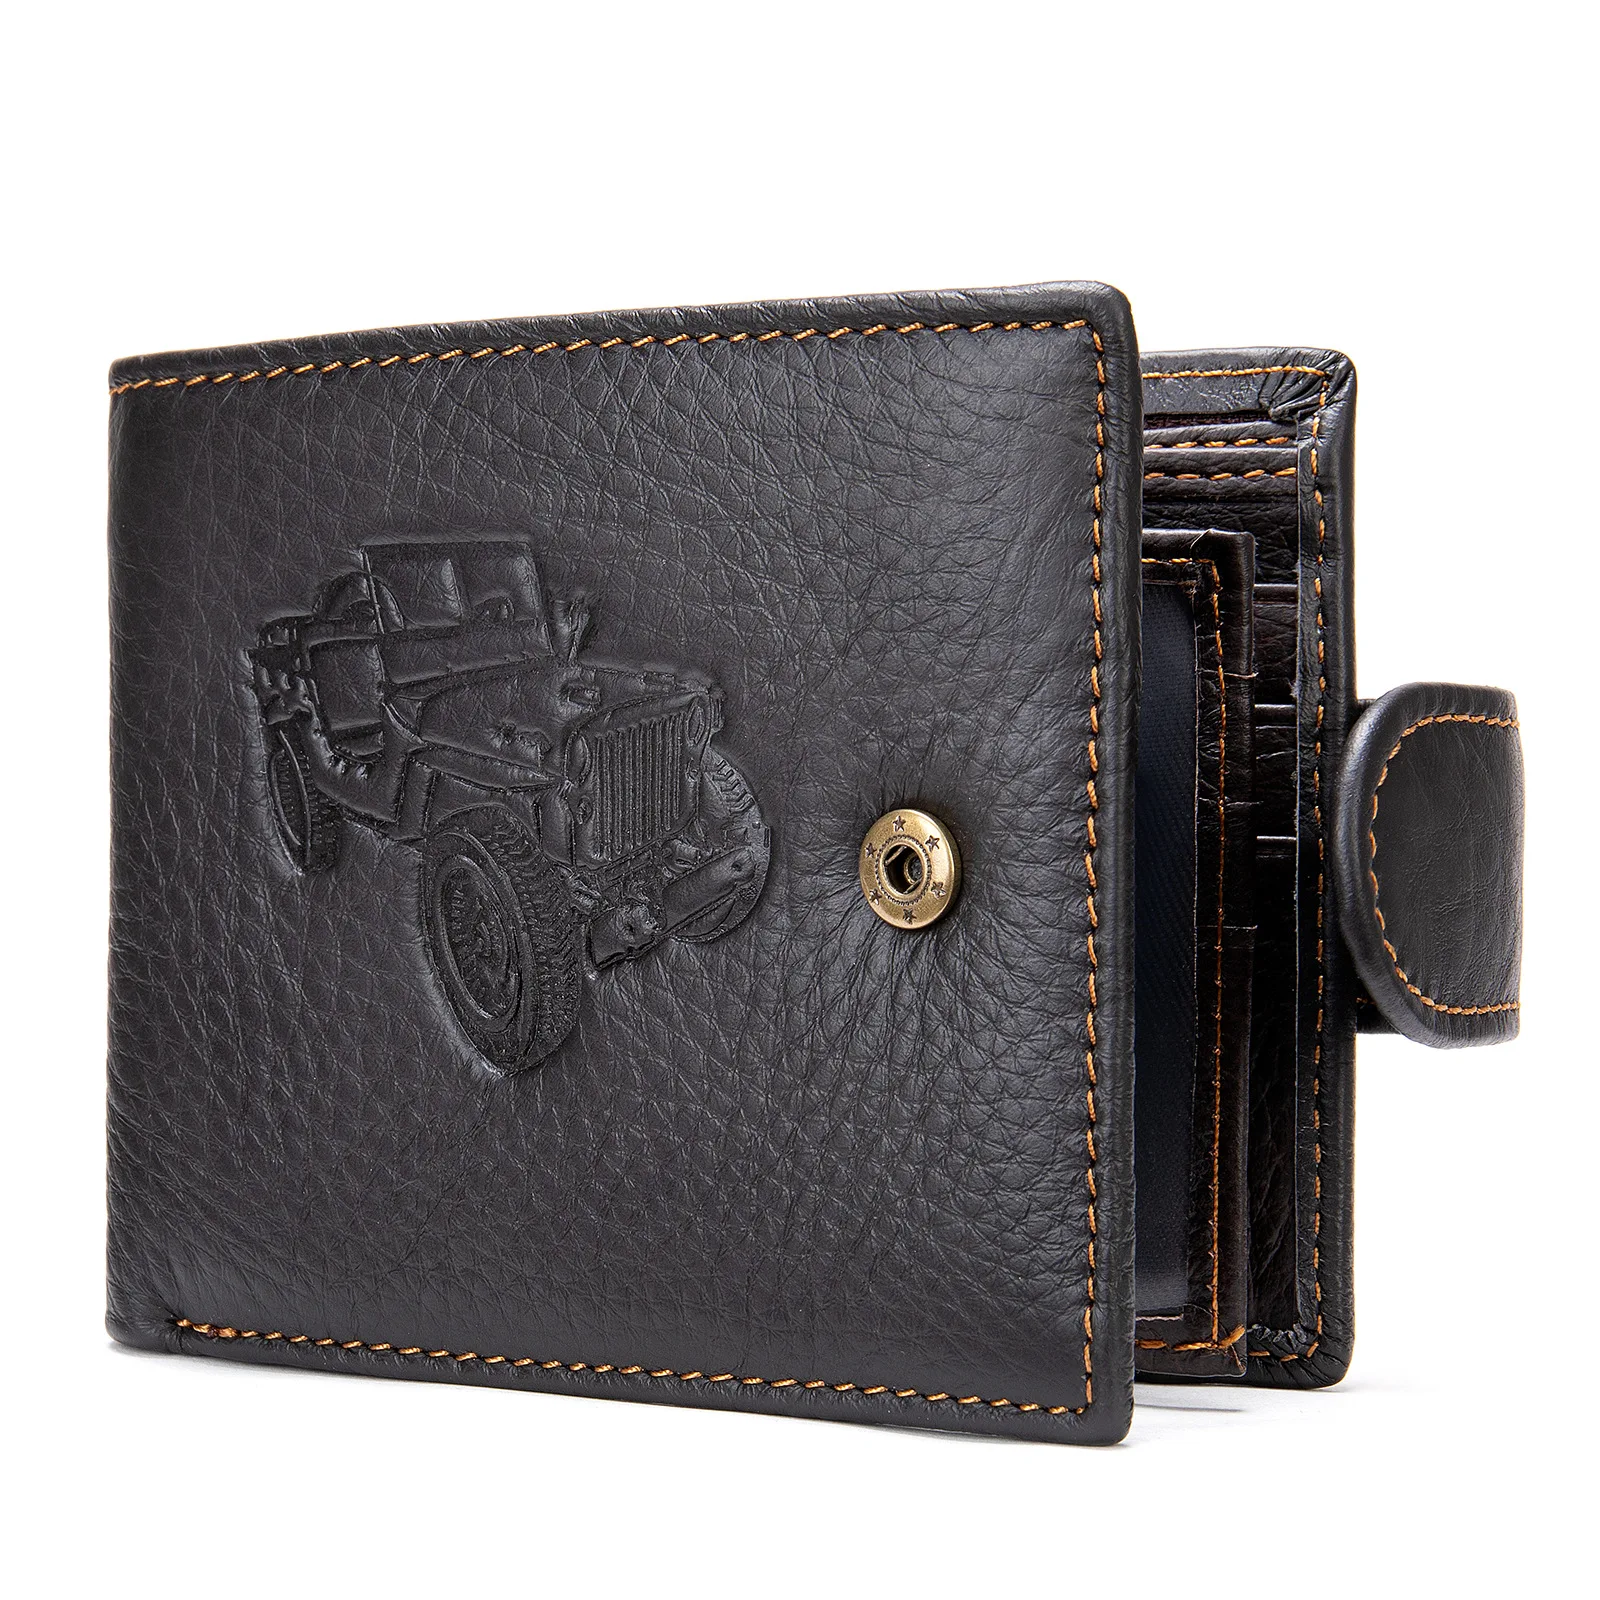 New Wallet Men's Leather Short Head Layer Cowhide Card Bag Personality Creative Wallet Men Gift